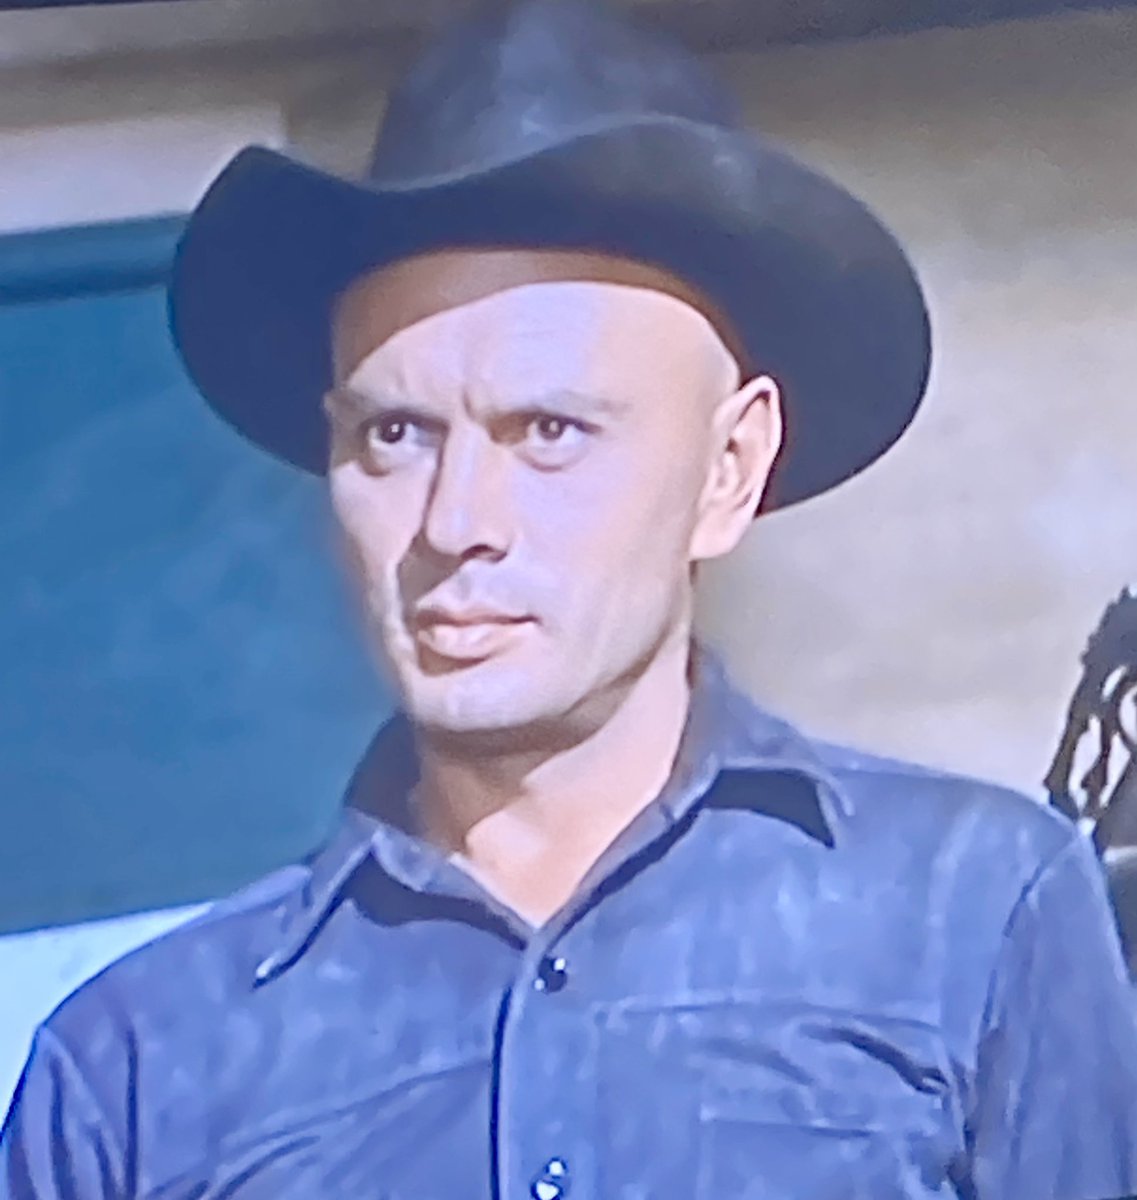 Now watching “The Magnificent Seven” on BBC4

Yul Brynner. 
Mmmm